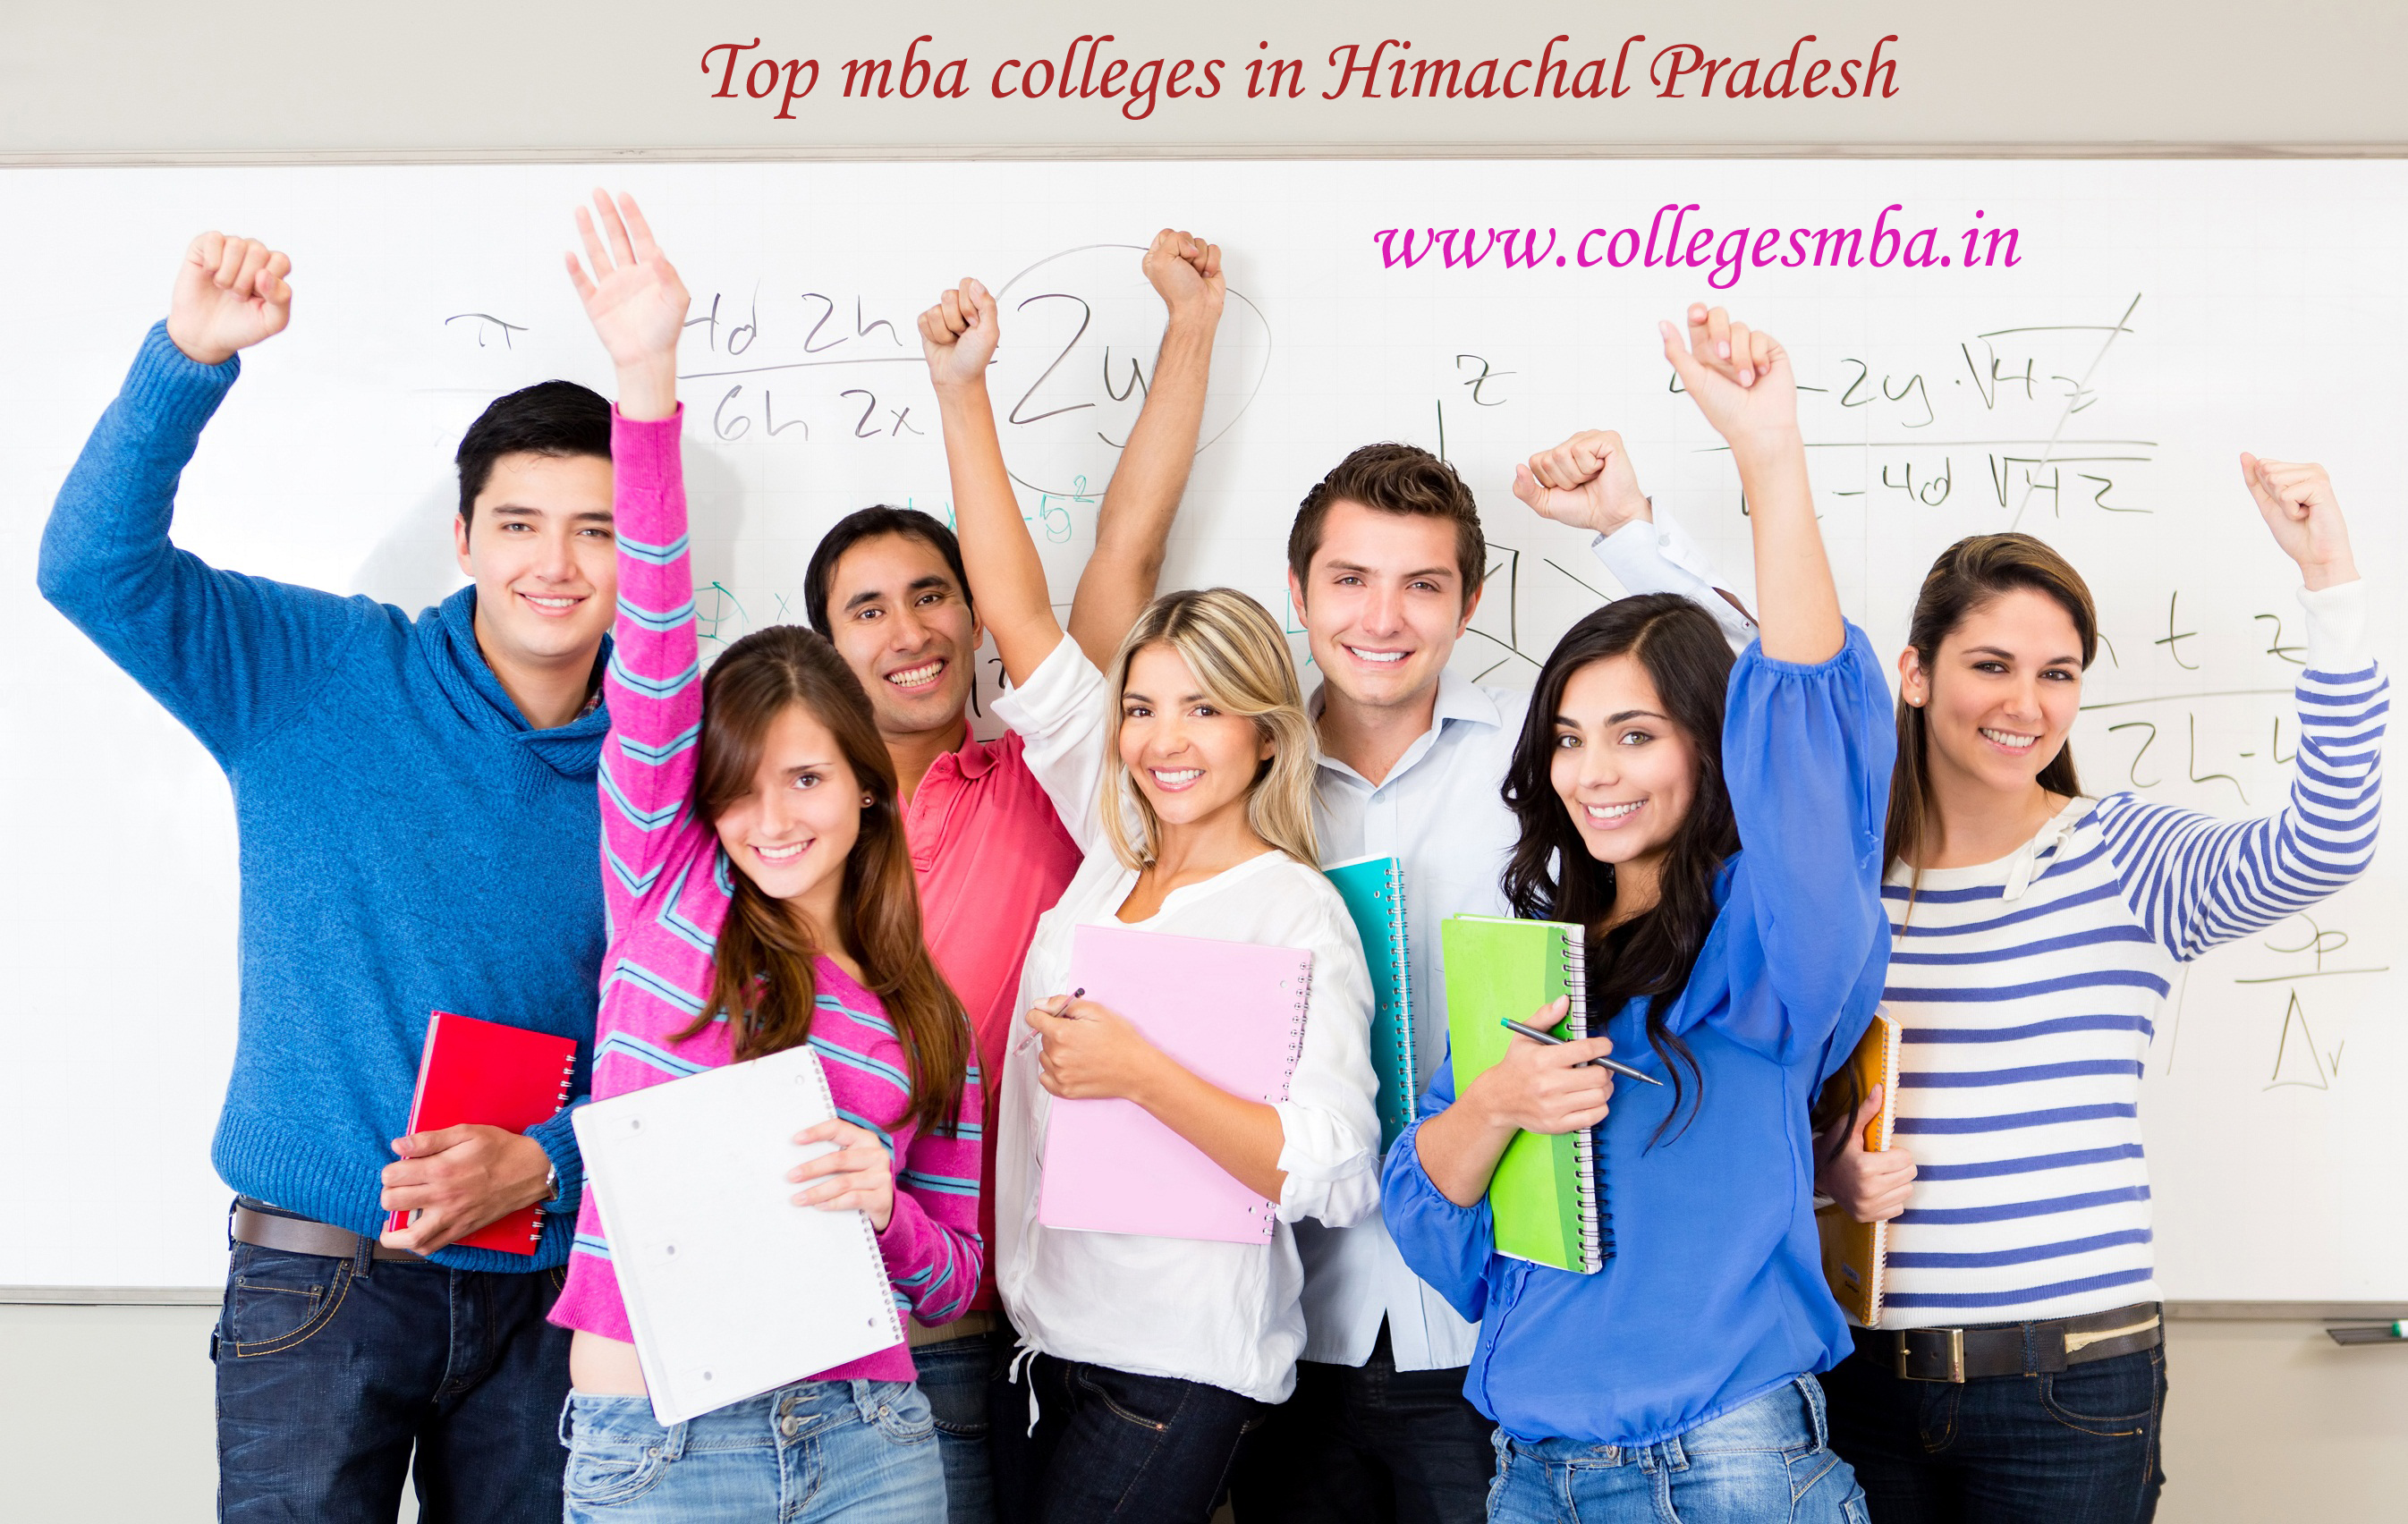 Top MBA Colleges in Himachal Pradesh